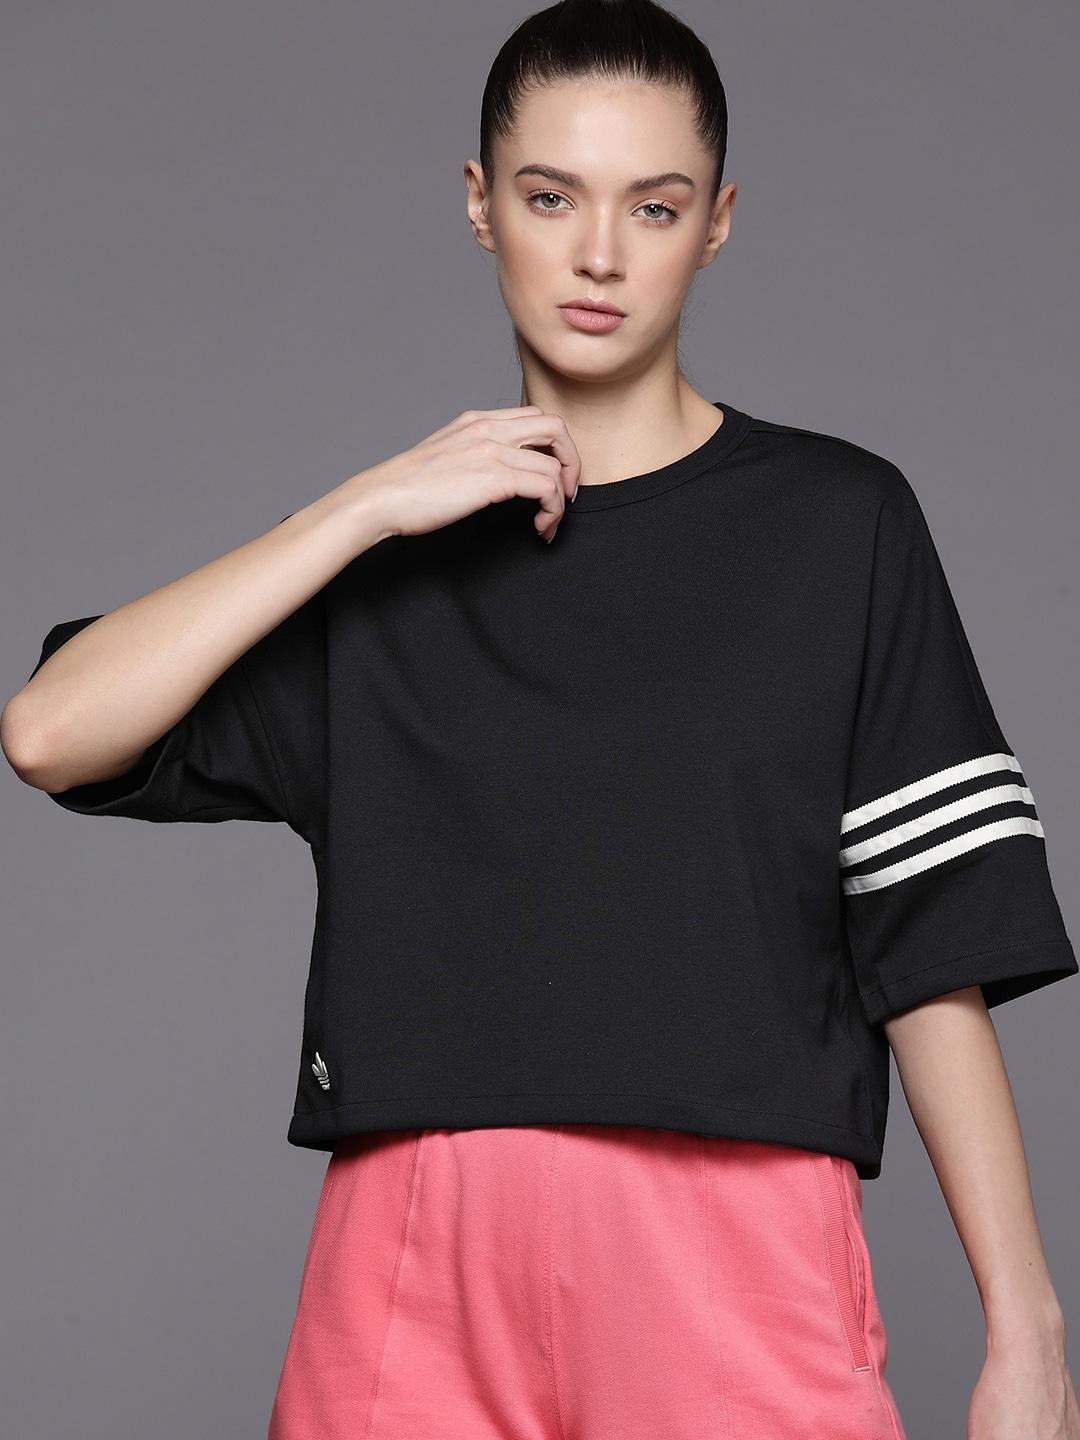 ADIDAS Originals 3-Stripes Extended Sleeves Boxy T-shirt